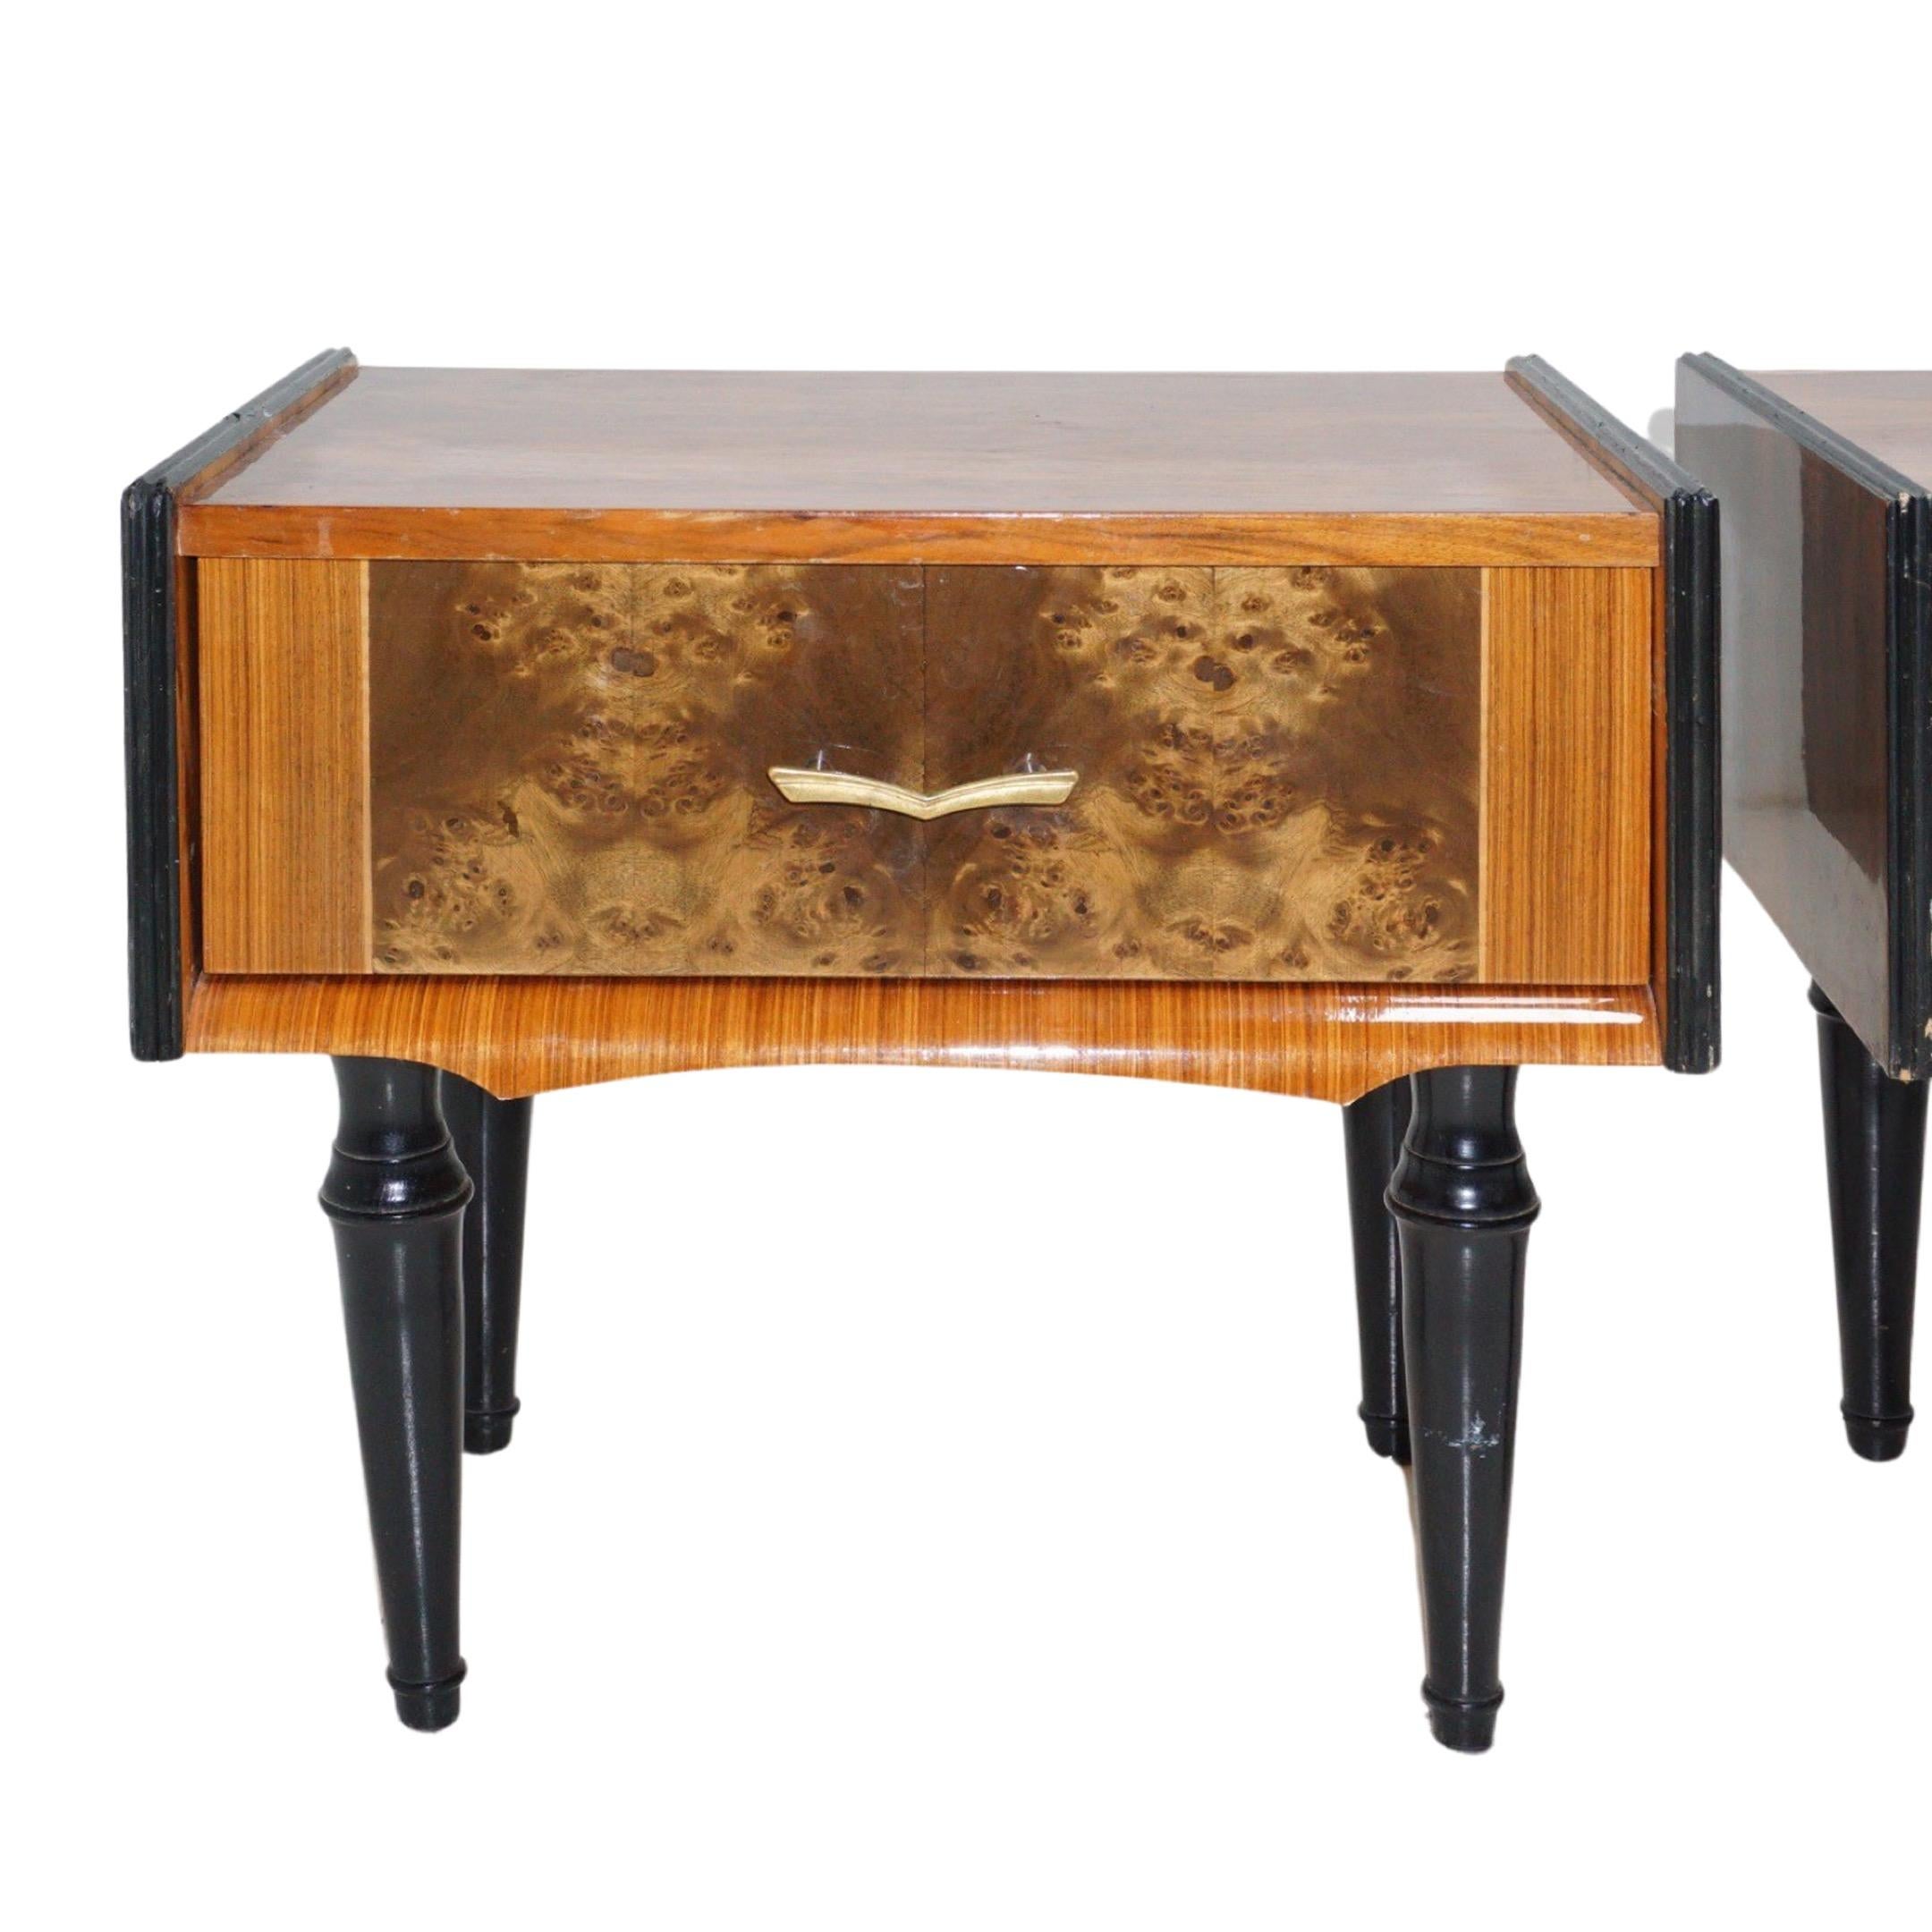 Dim the lights, set the ambiance, and let these midcentury lacquered wood nightstands be the guardians of your nocturnal odyssey. These nightstands aren't just functional; they're the secrets of your bedside, telling stories of voyages and dreams